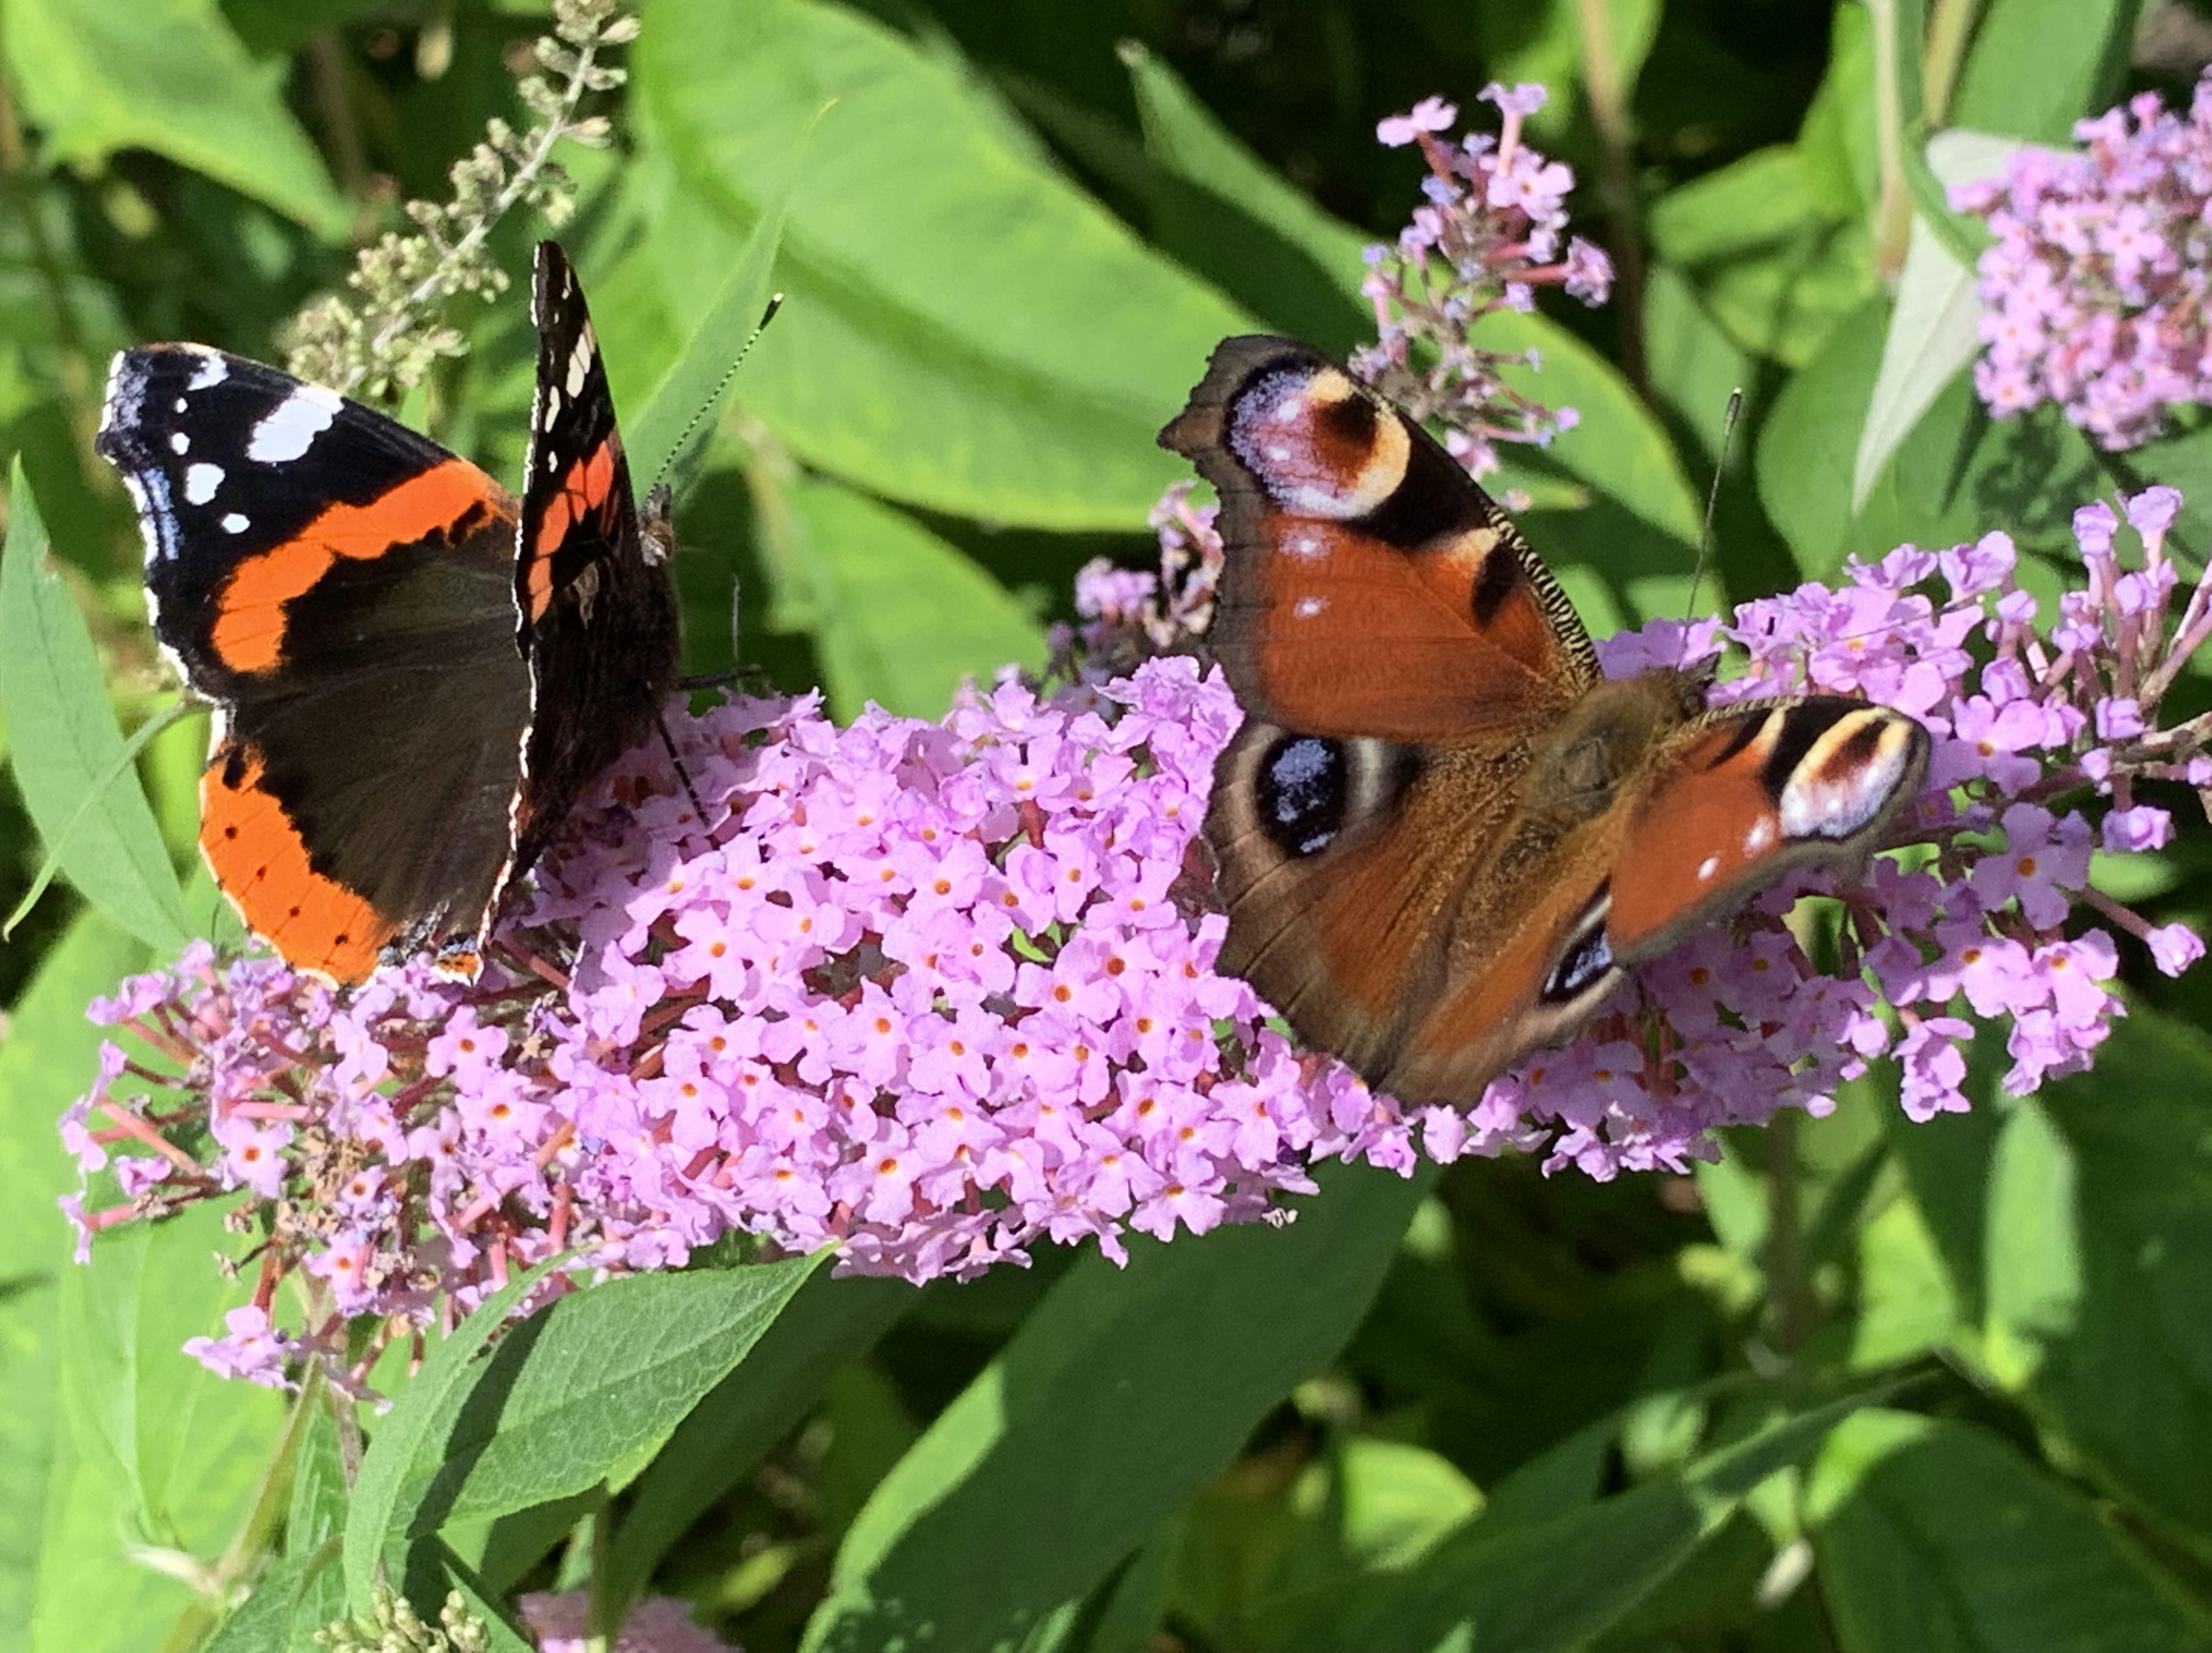 Red Admiral and Peacock